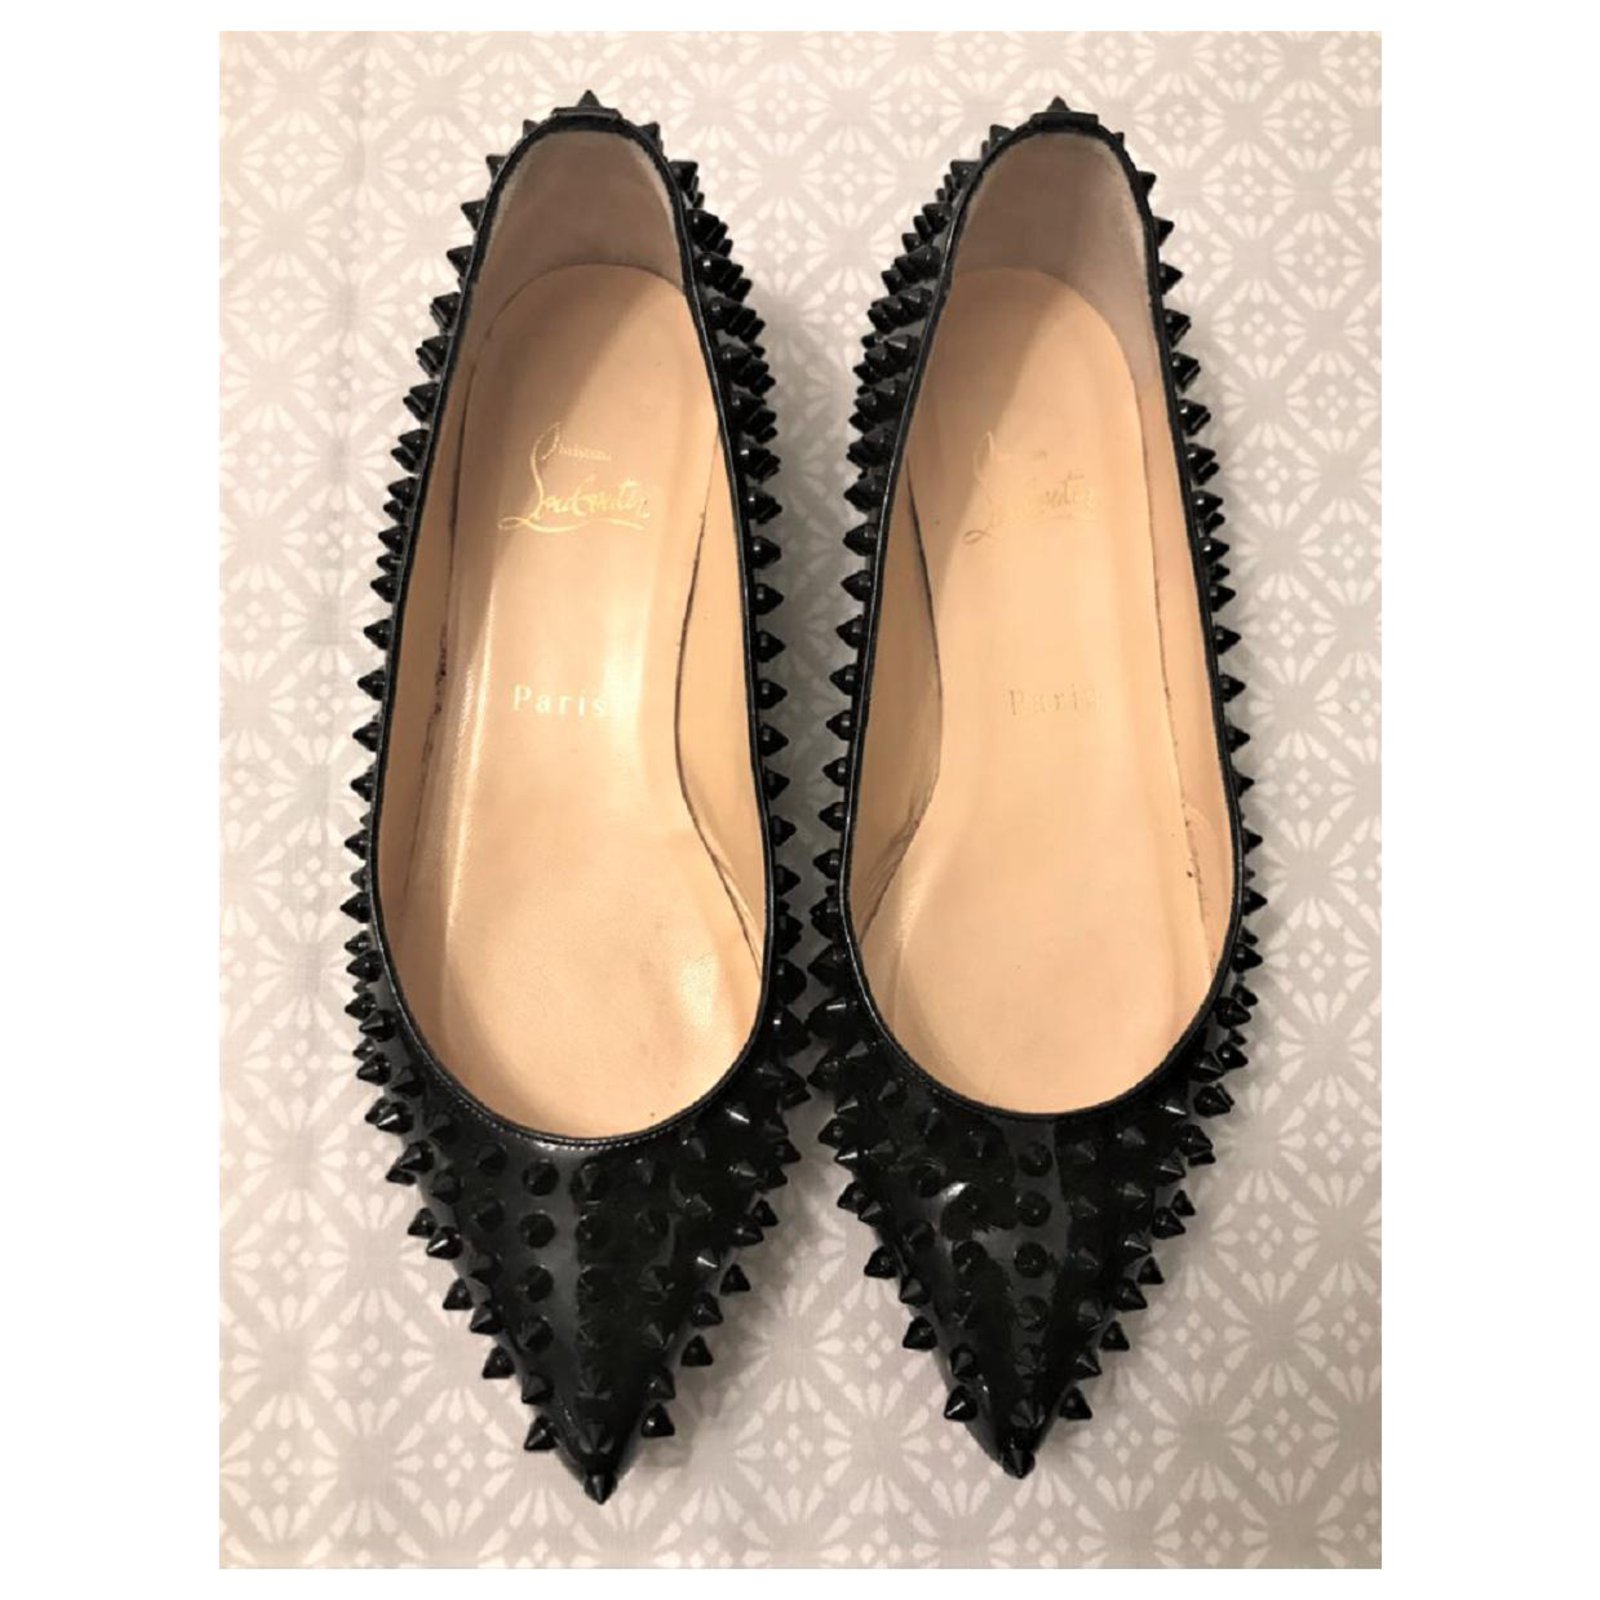 Christian Louboutin Black Patent Pigalle spiked flats EU38 Patent ...